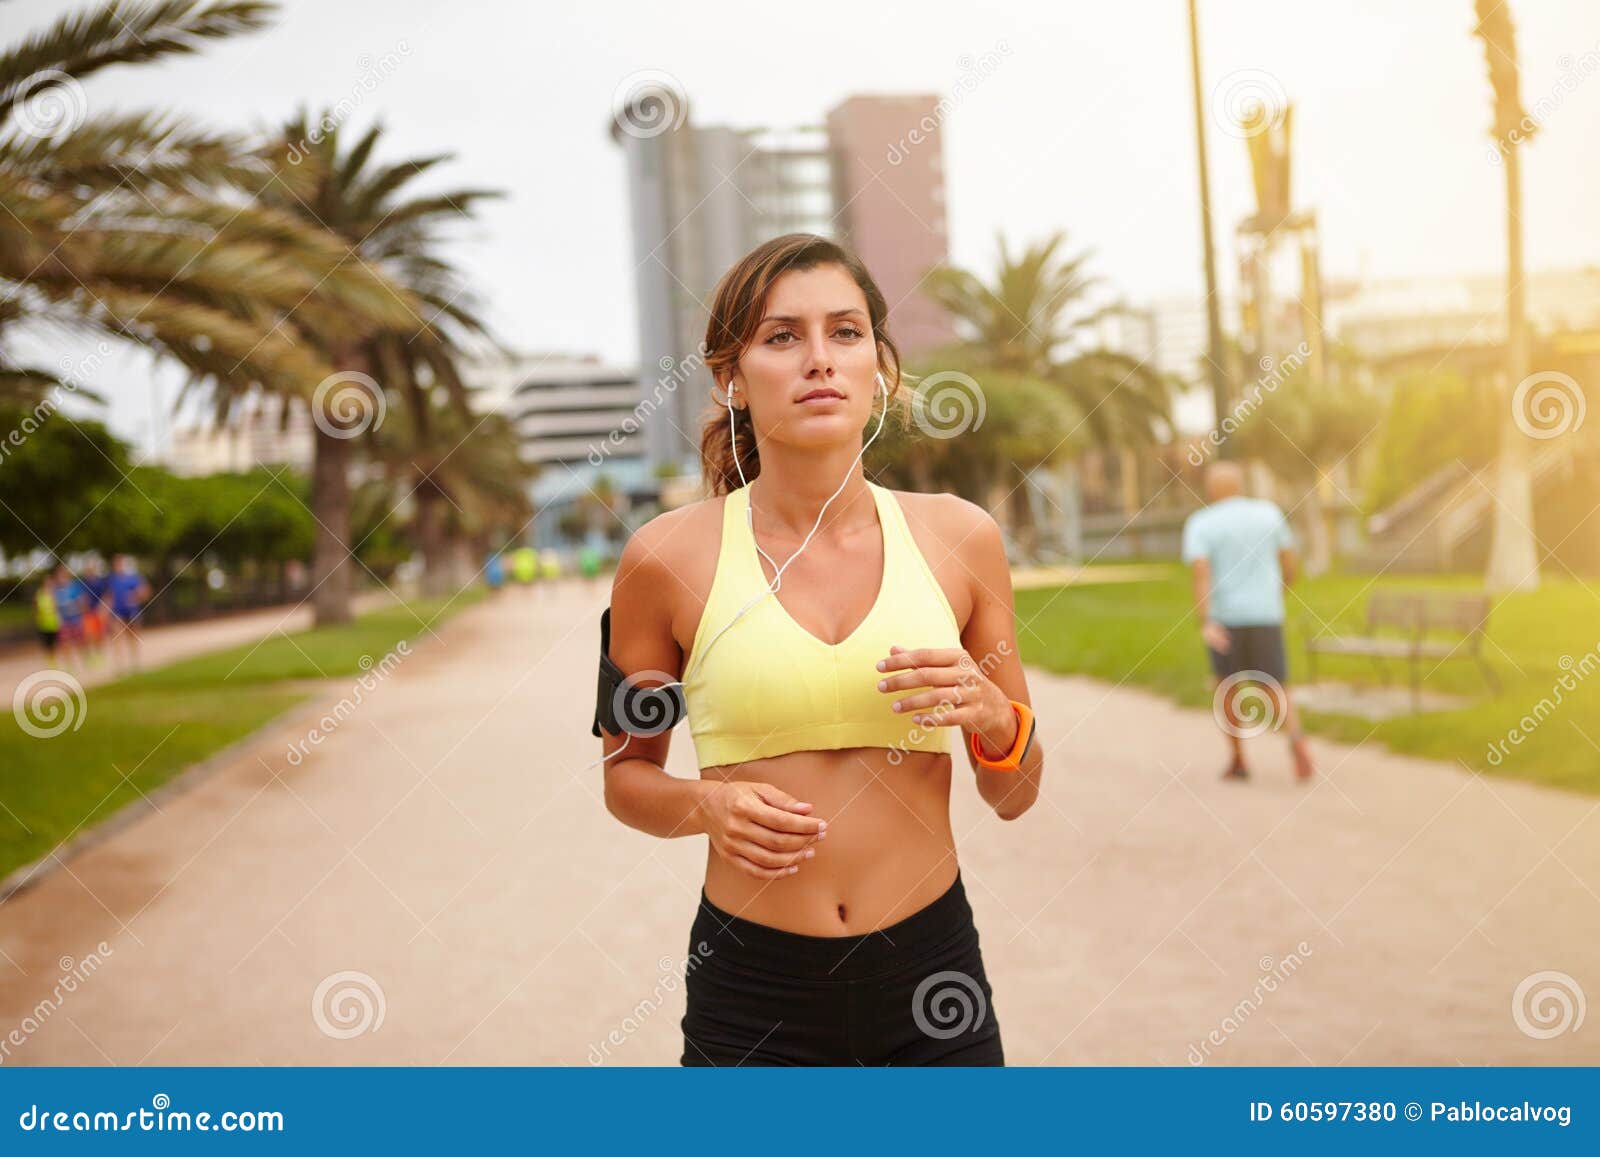 Young Athlete Listening To Music while Doing Sport Stock Photo - Image ...